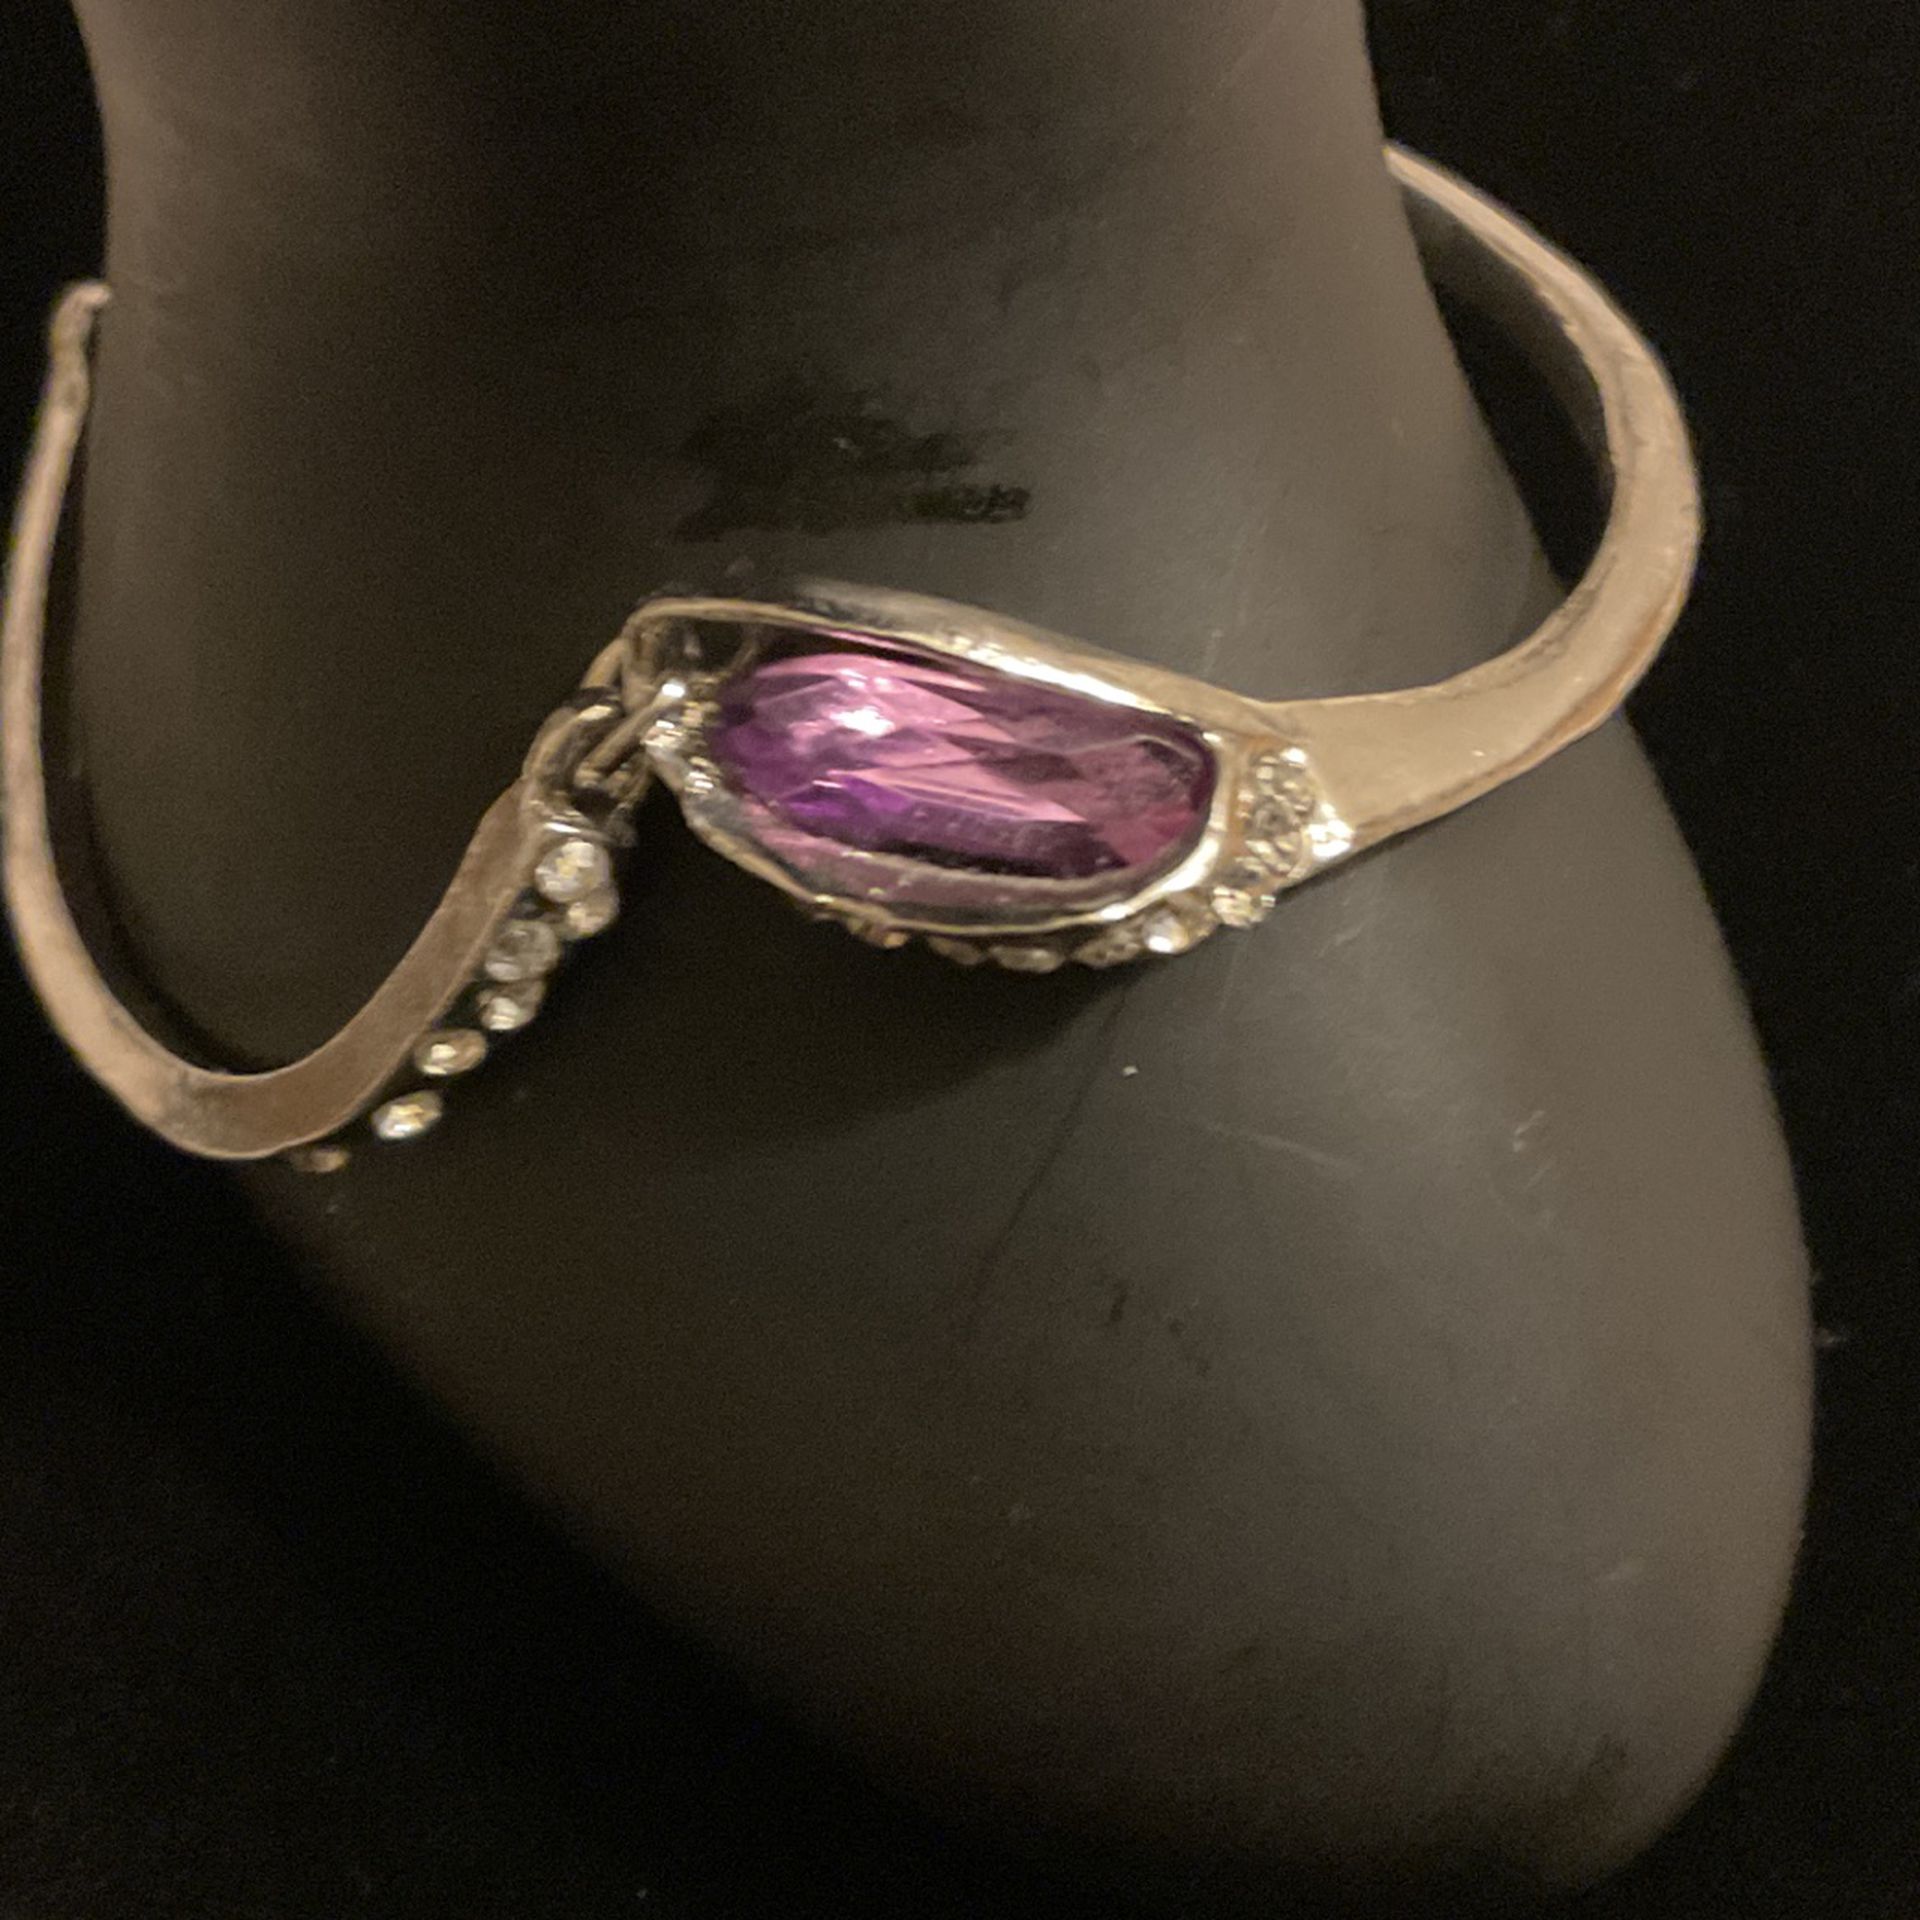 Silver Bracelet With Amethyst Stone And Rhinestones 